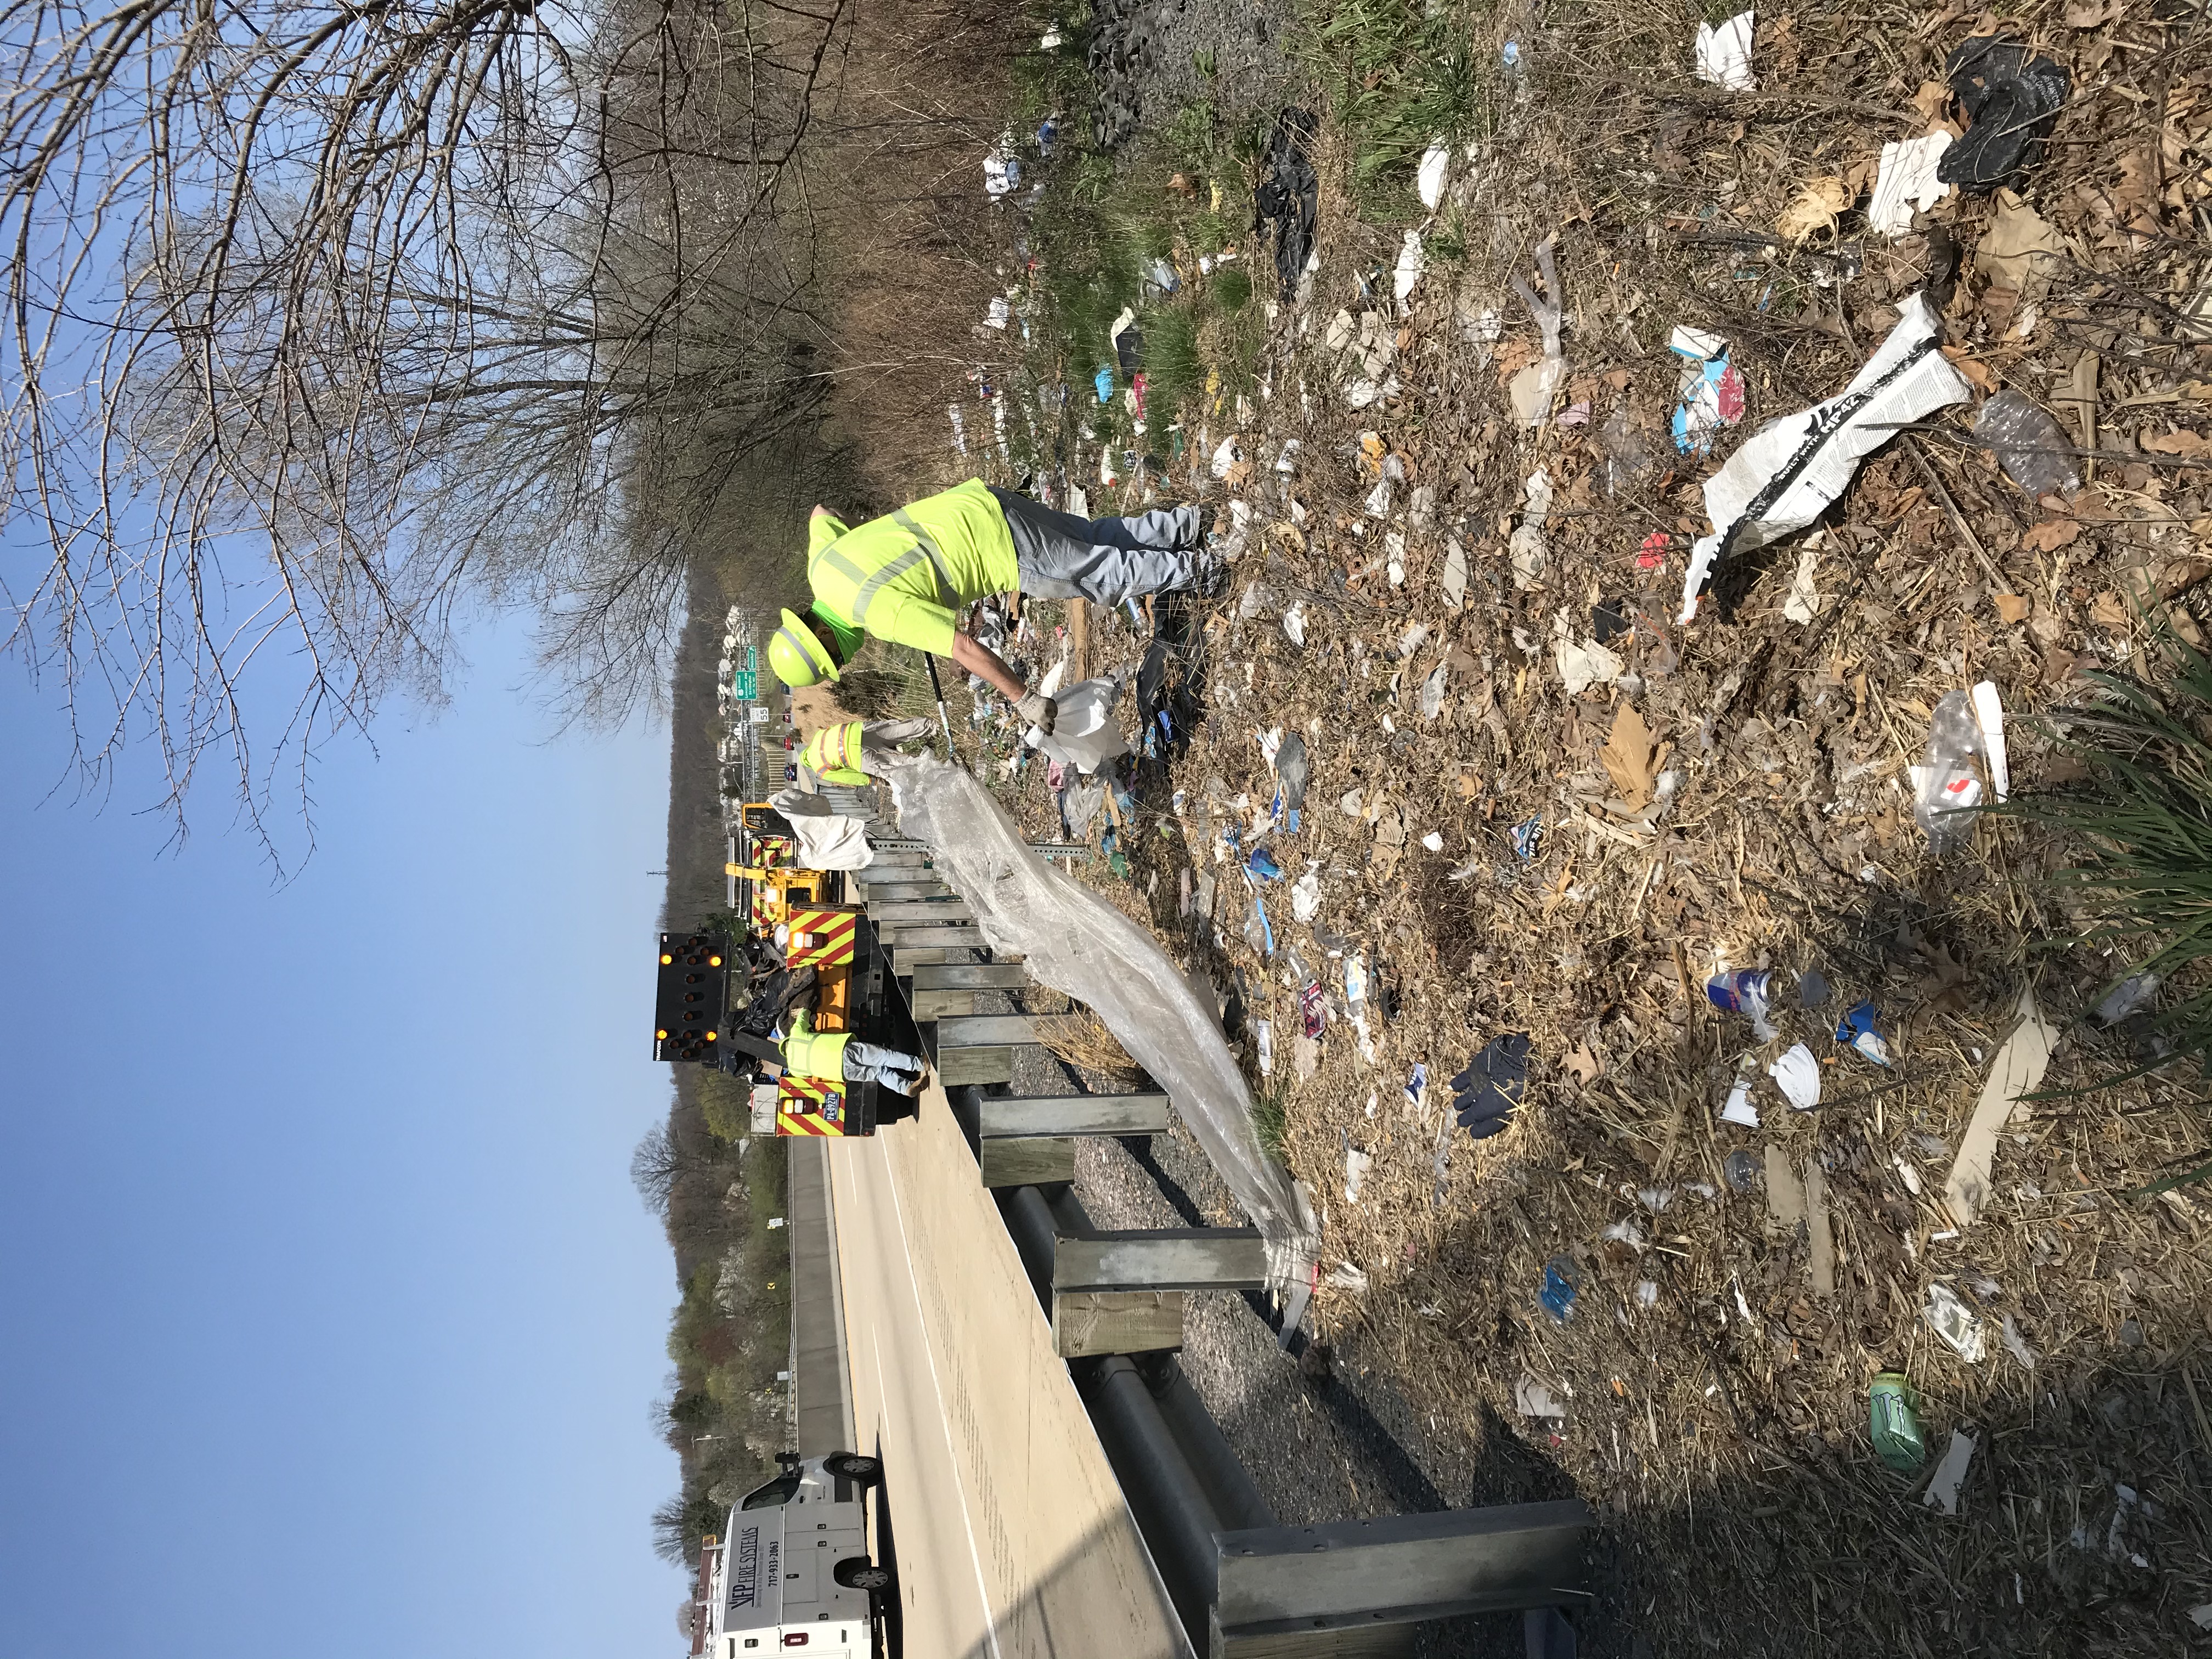 Road crew cleaning up litter